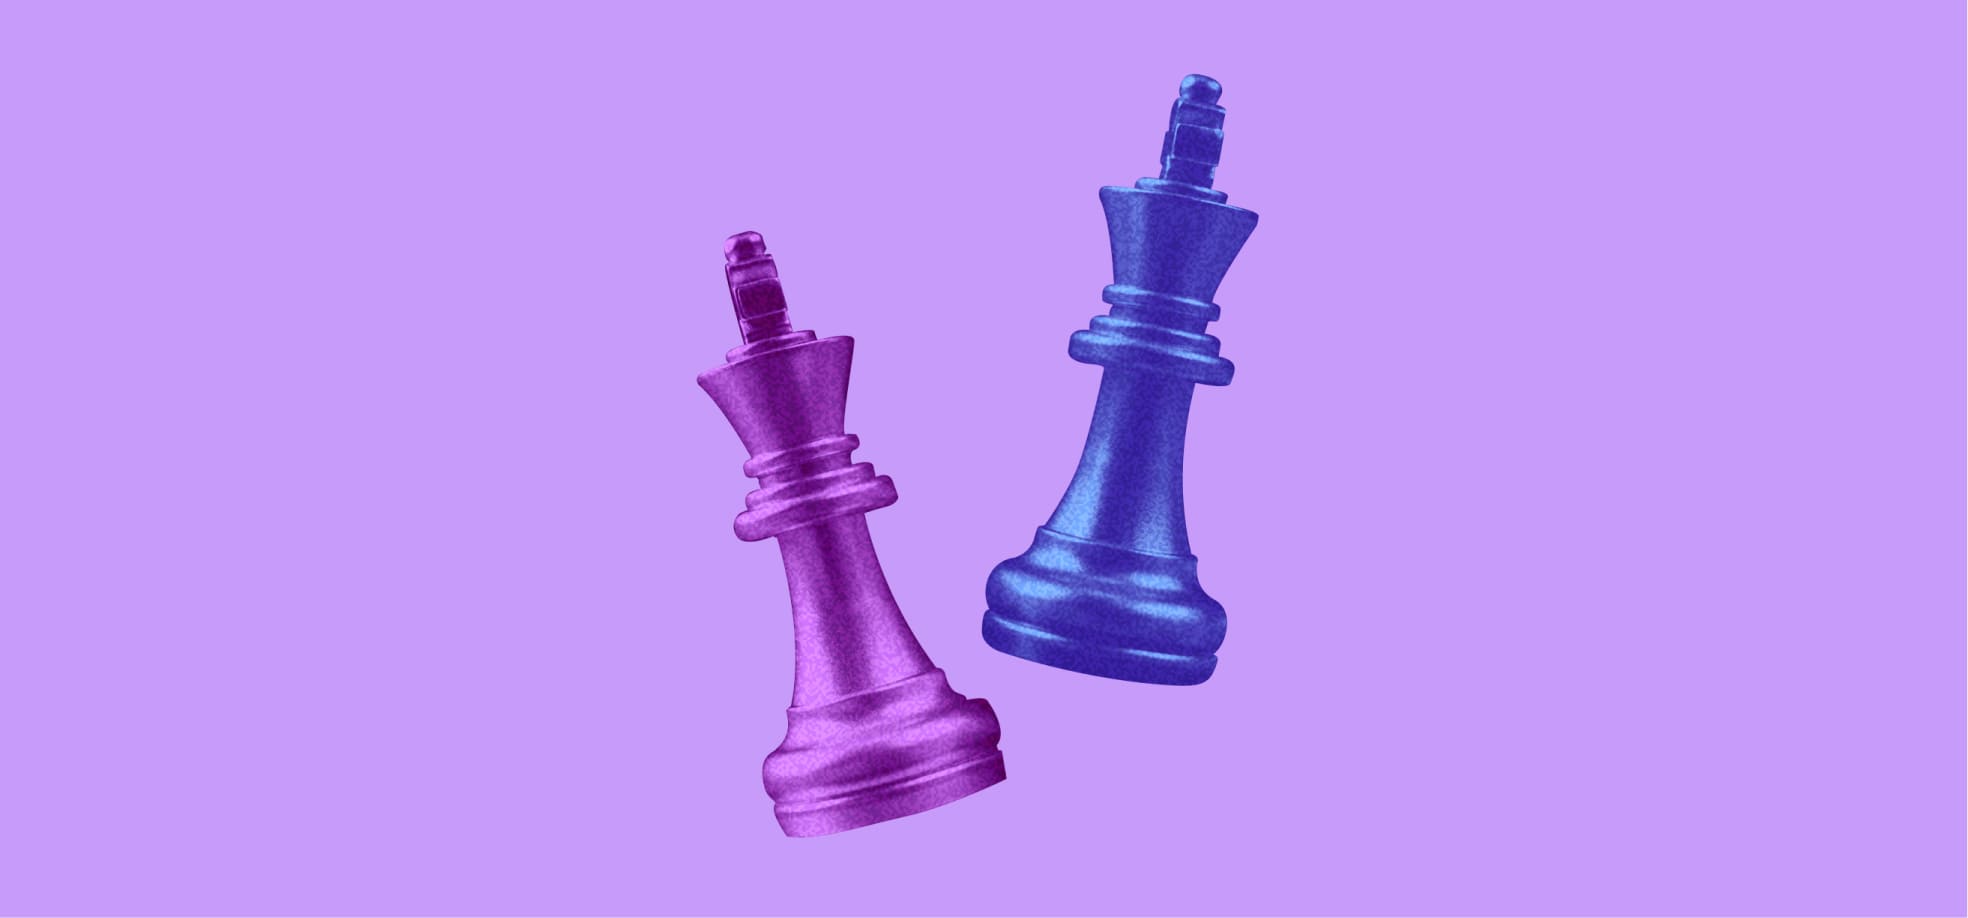 chess king and queen figure illustrations on a purple background